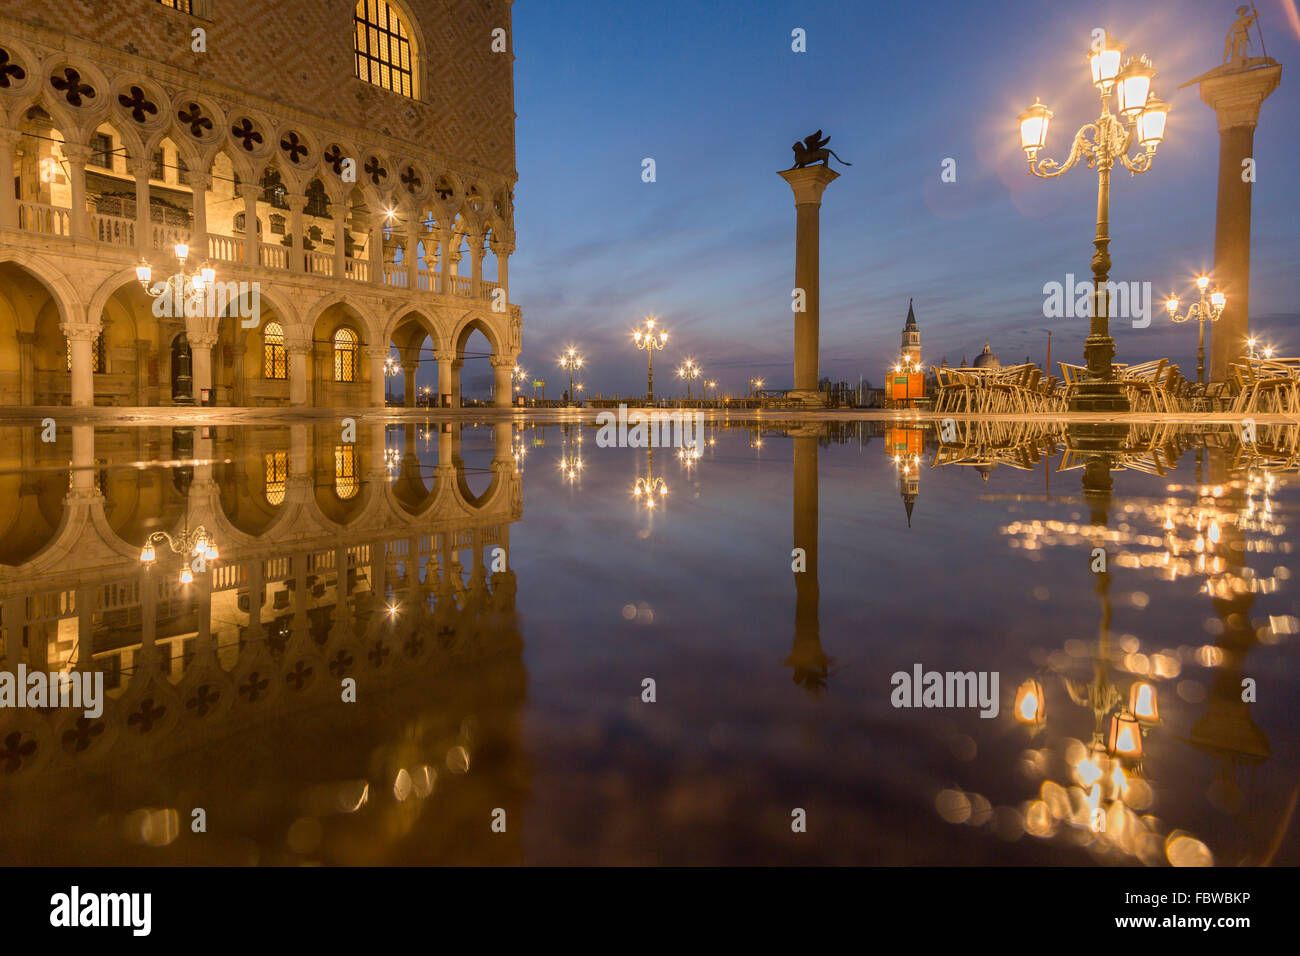 Flood, Piazzetta and the Doge's Palace, Venice, Italy Stock Photo